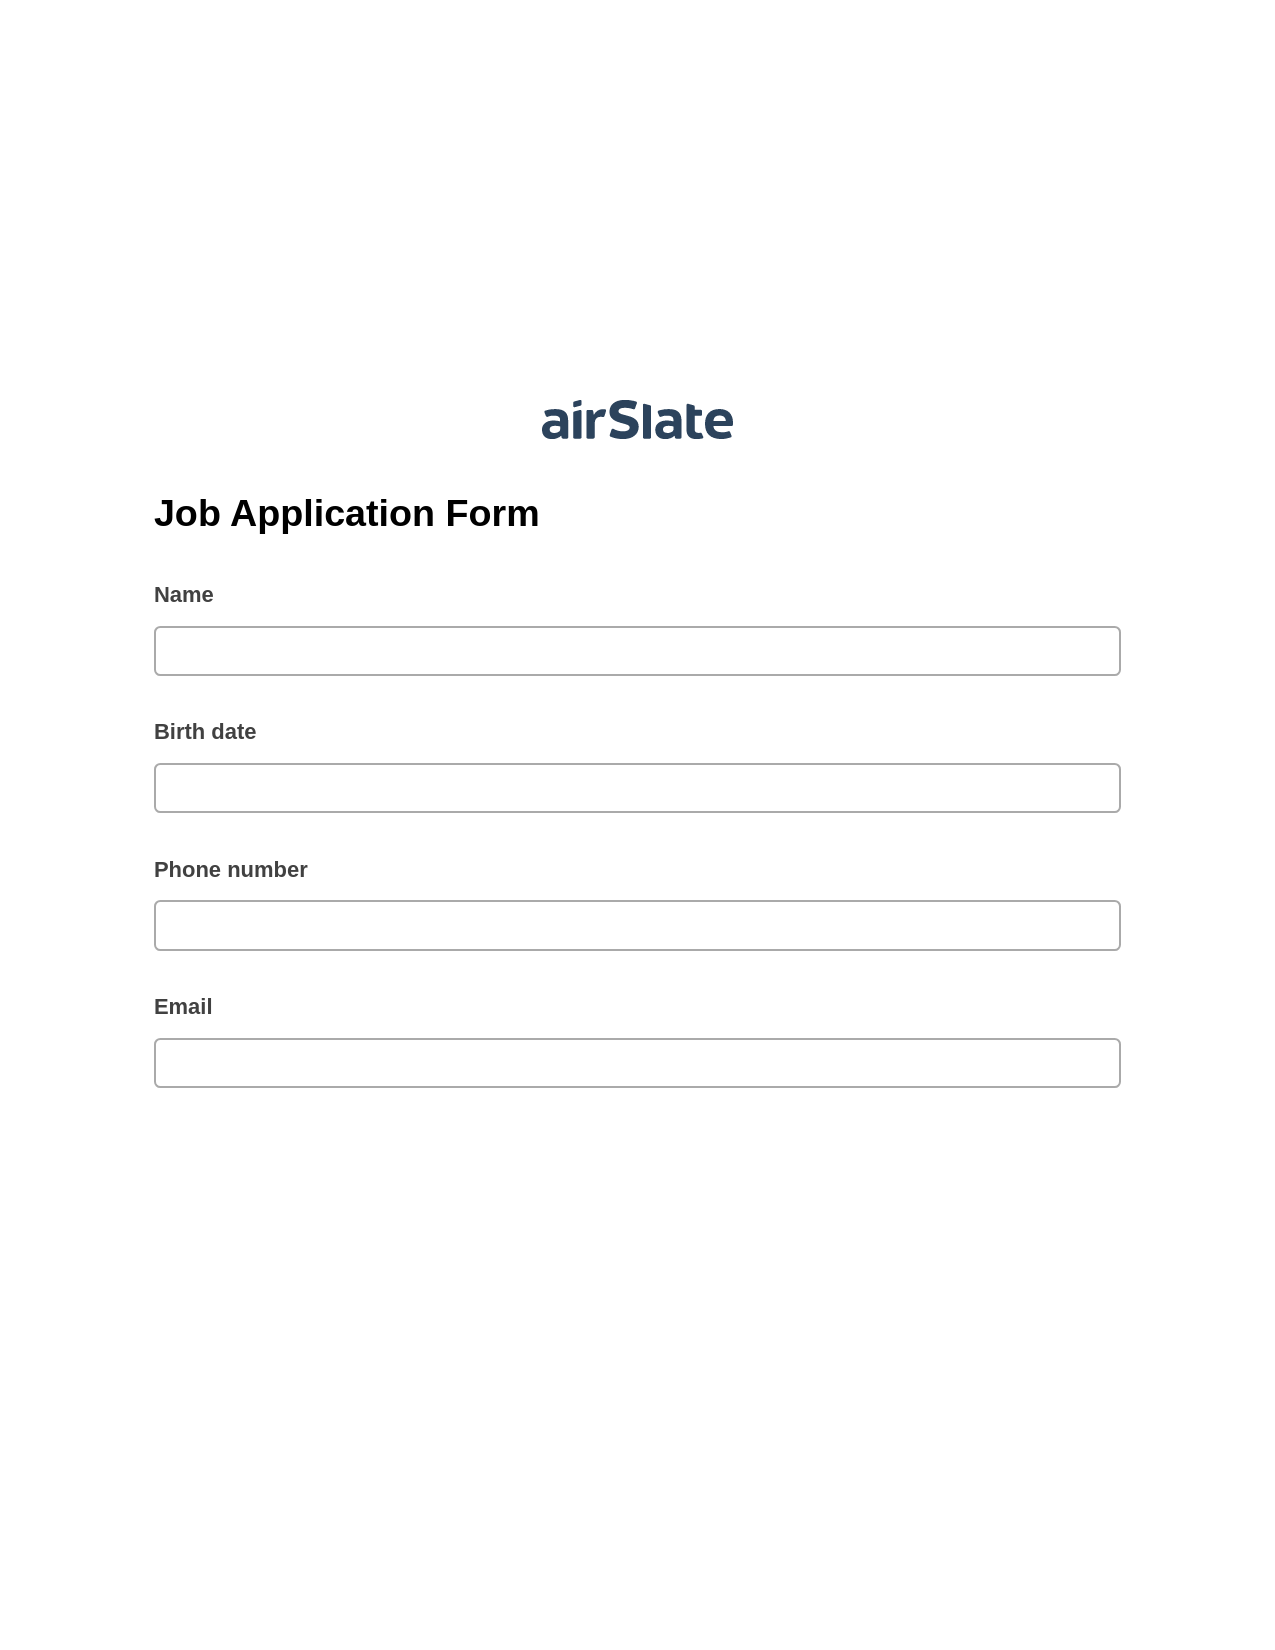 Multirole Job Application Form Pre-fill Dropdowns from Smartsheet Bot, Update NetSuite Records Bot, Export to NetSuite Record Bot